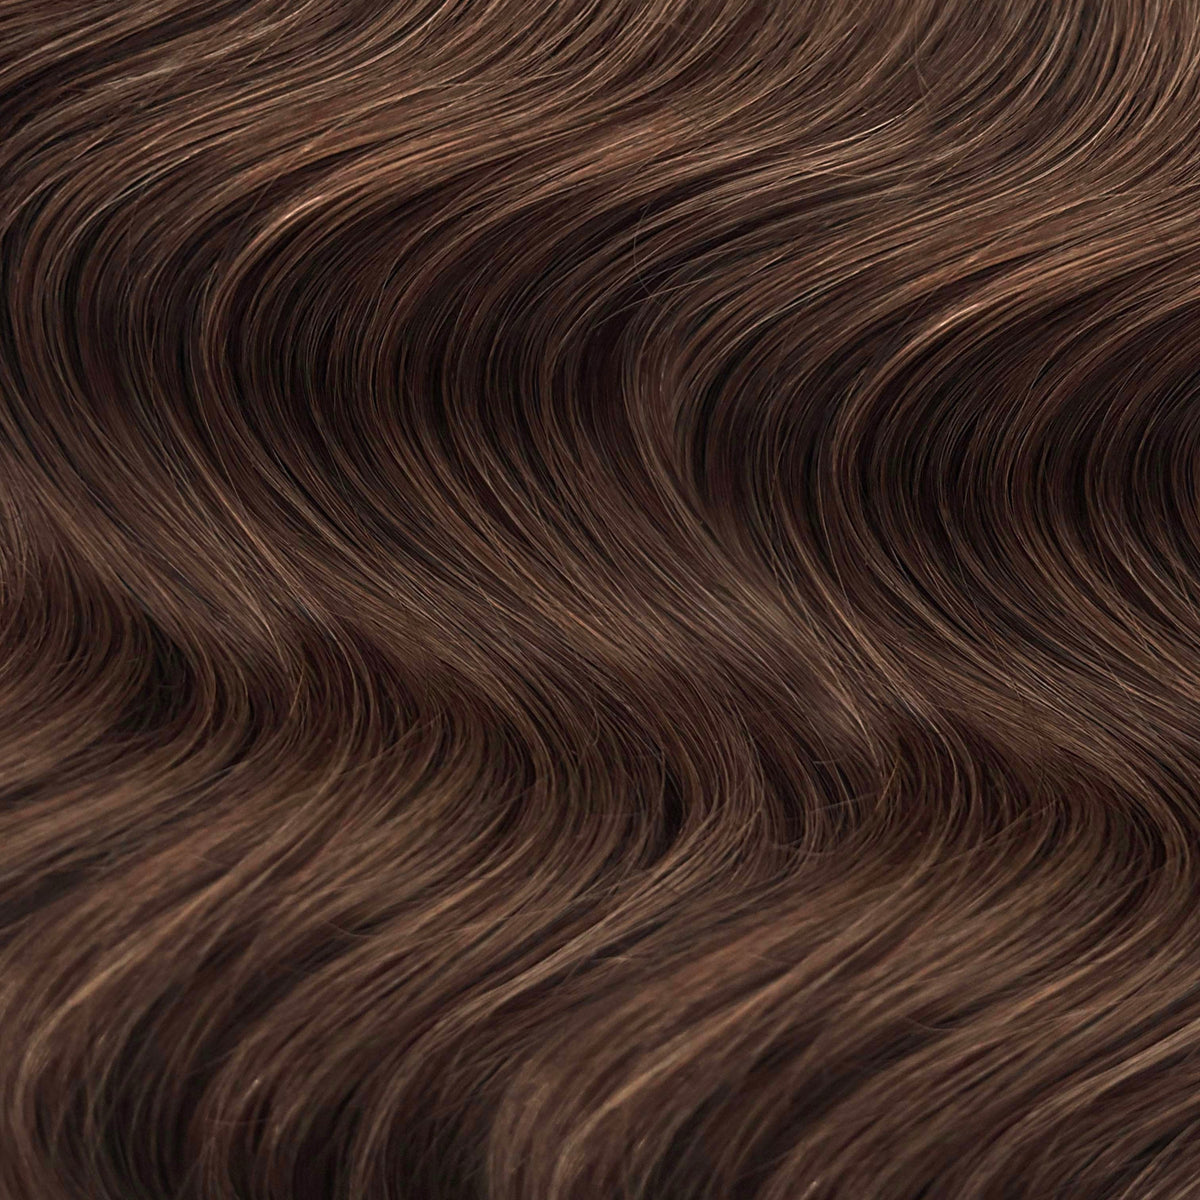 Nano Ring Hair Extensions #4 Chestnut Brown